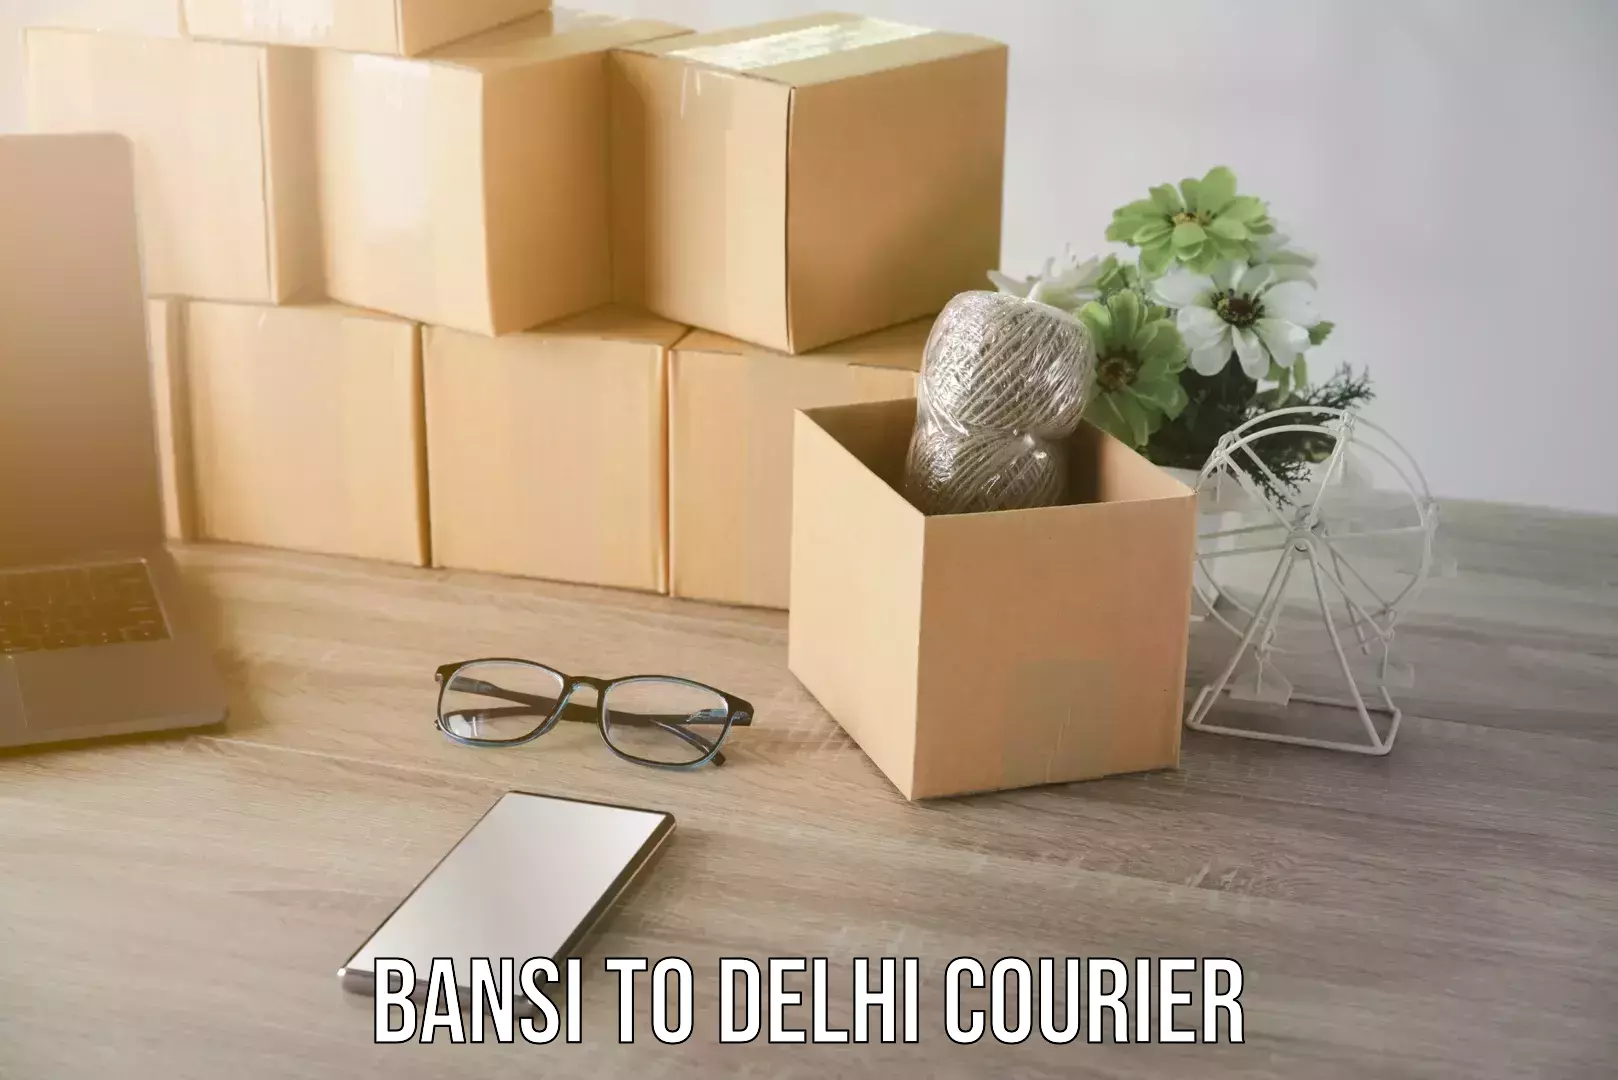 Cost-effective courier options Bansi to Delhi